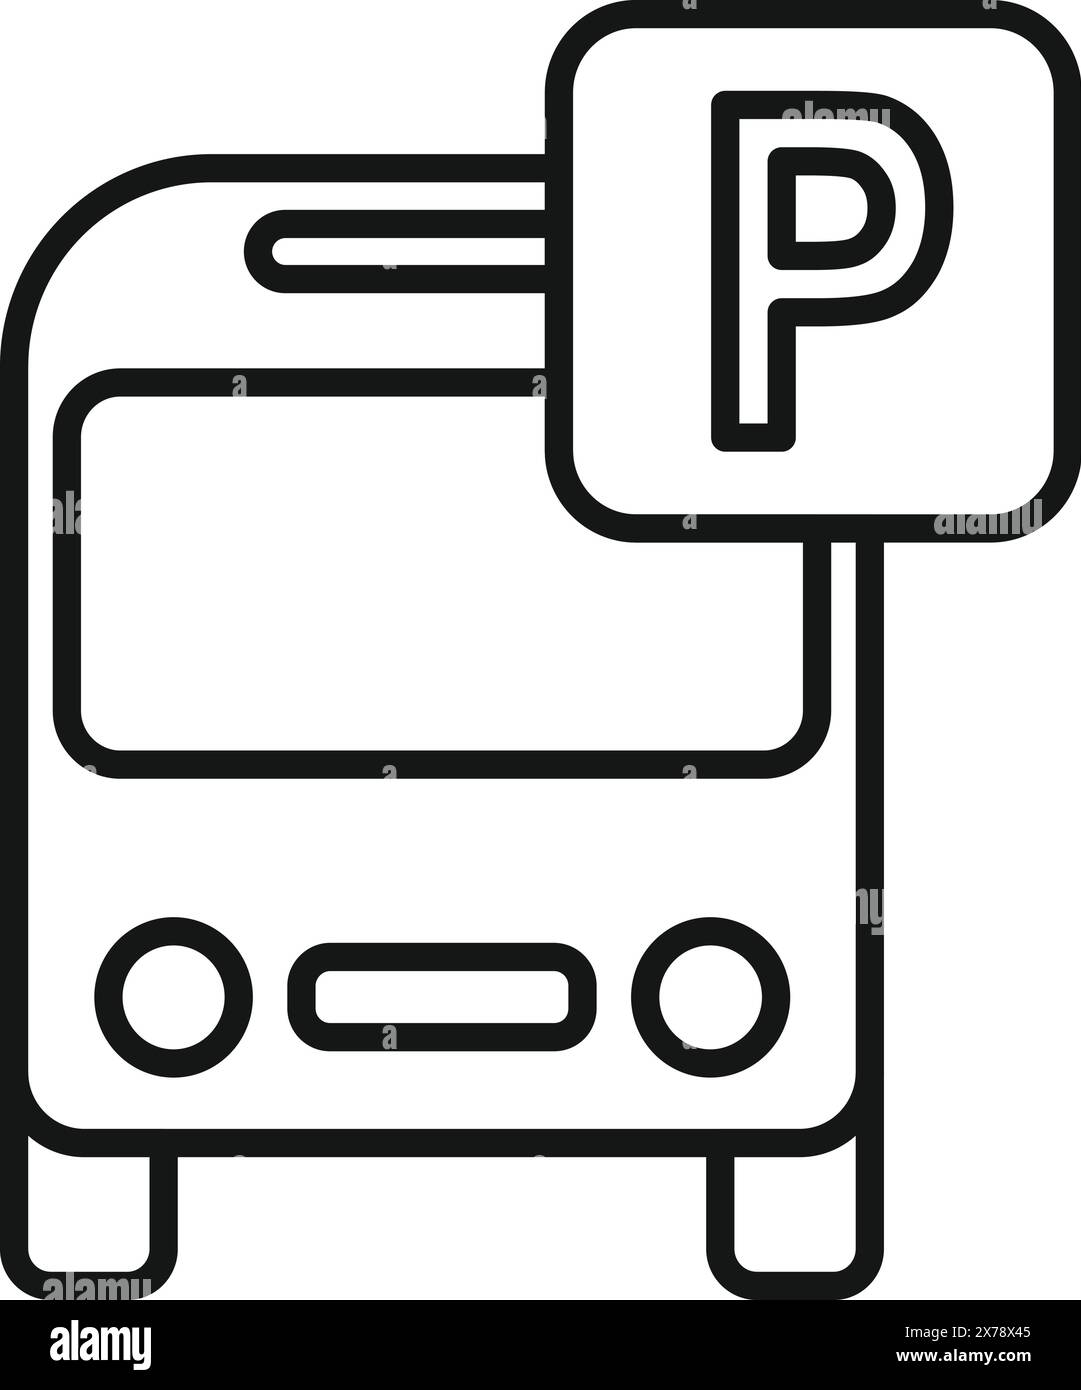 Black and white vector illustration of a bus with a parking sign Stock Vector